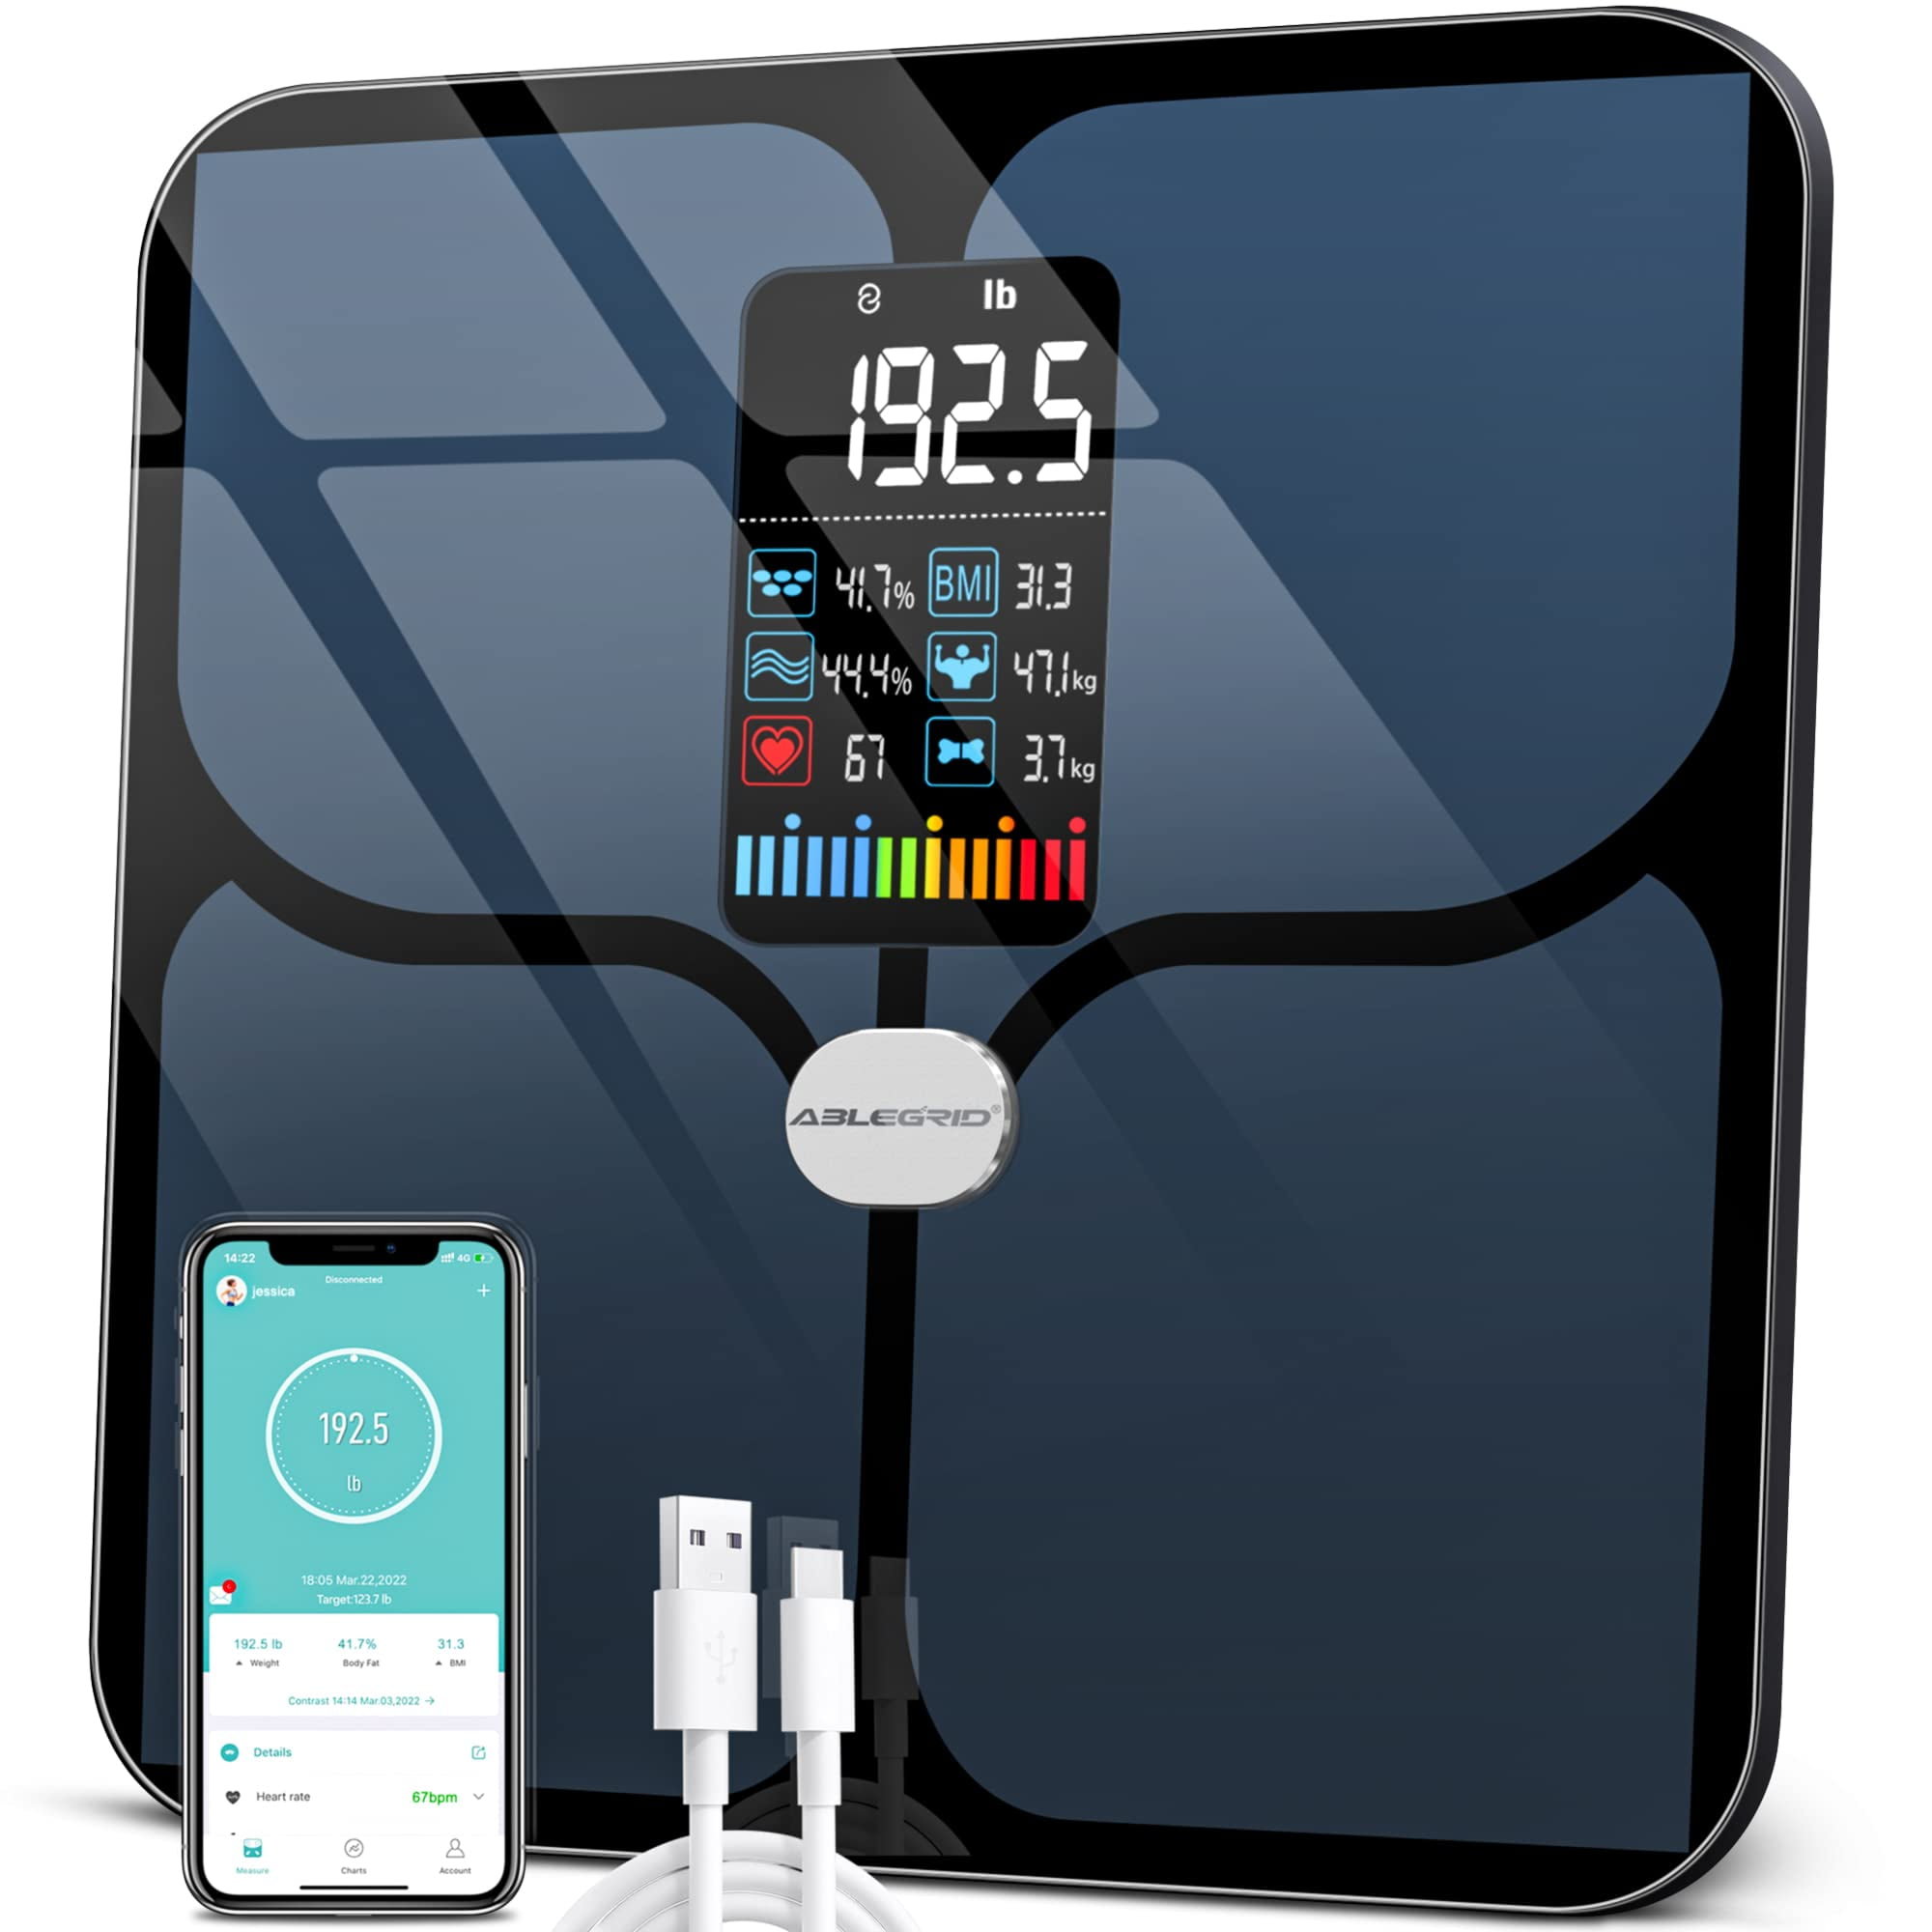 GE Digital Body Weight Scale for Bathroom, 500lbs Capacity Smart BMI Weight  Scales for People Accurate Bluetooth Weighing Scale Electronic Weigh